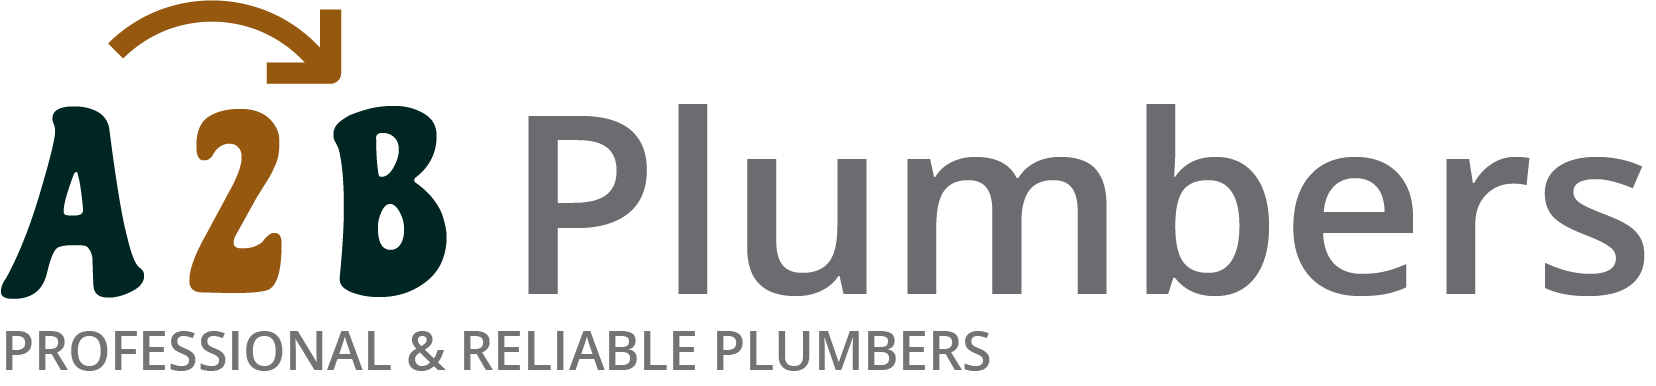 If you need a boiler installed, a radiator repaired or a leaking tap fixed, call us now - we provide services for properties in Cheadle Hulme and the local area.